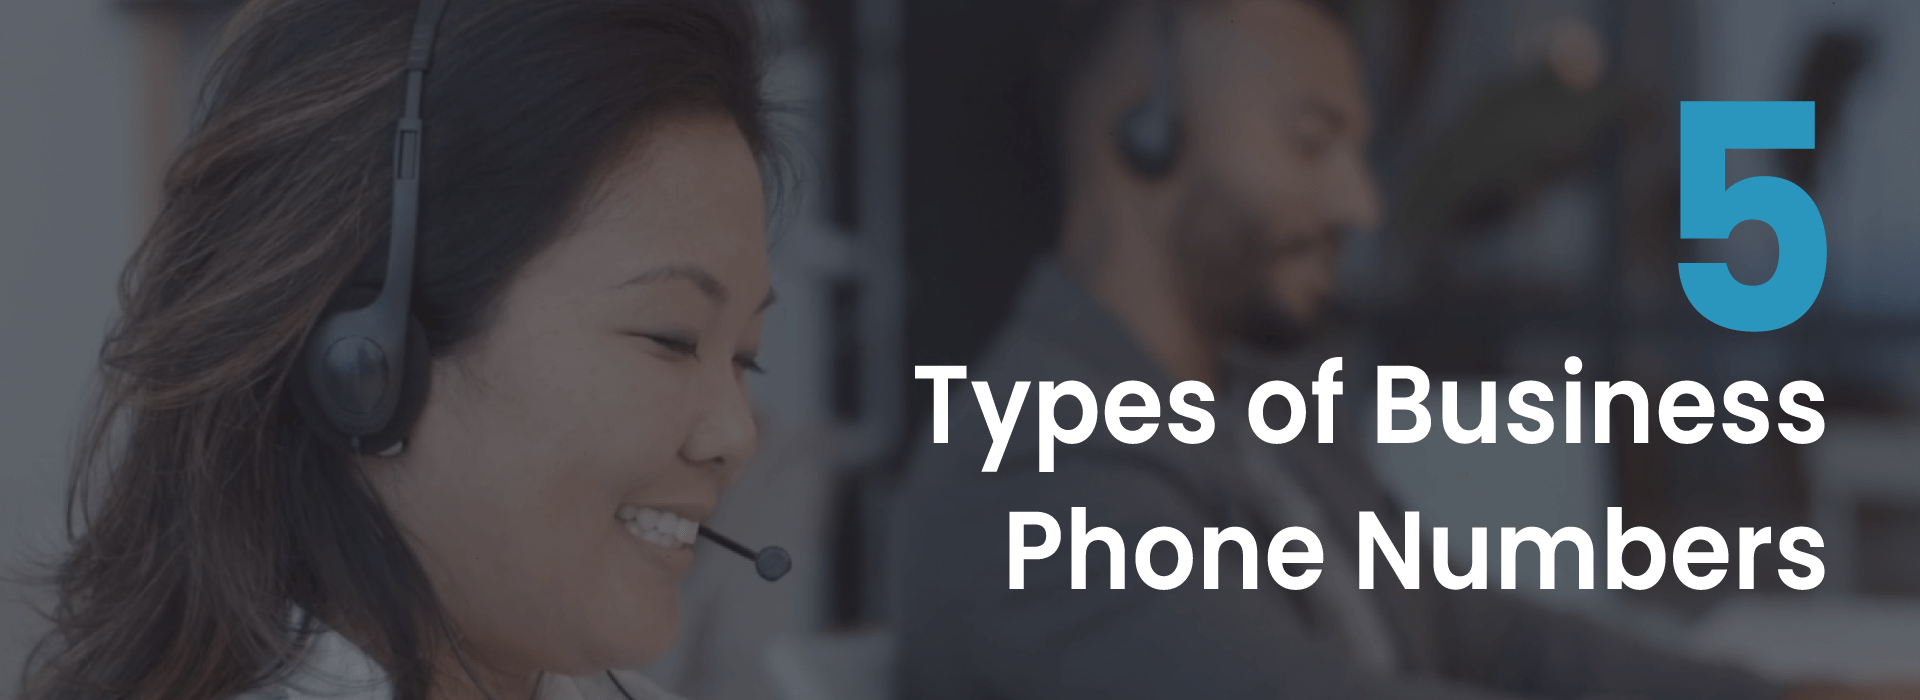 5 types of business phone numbers